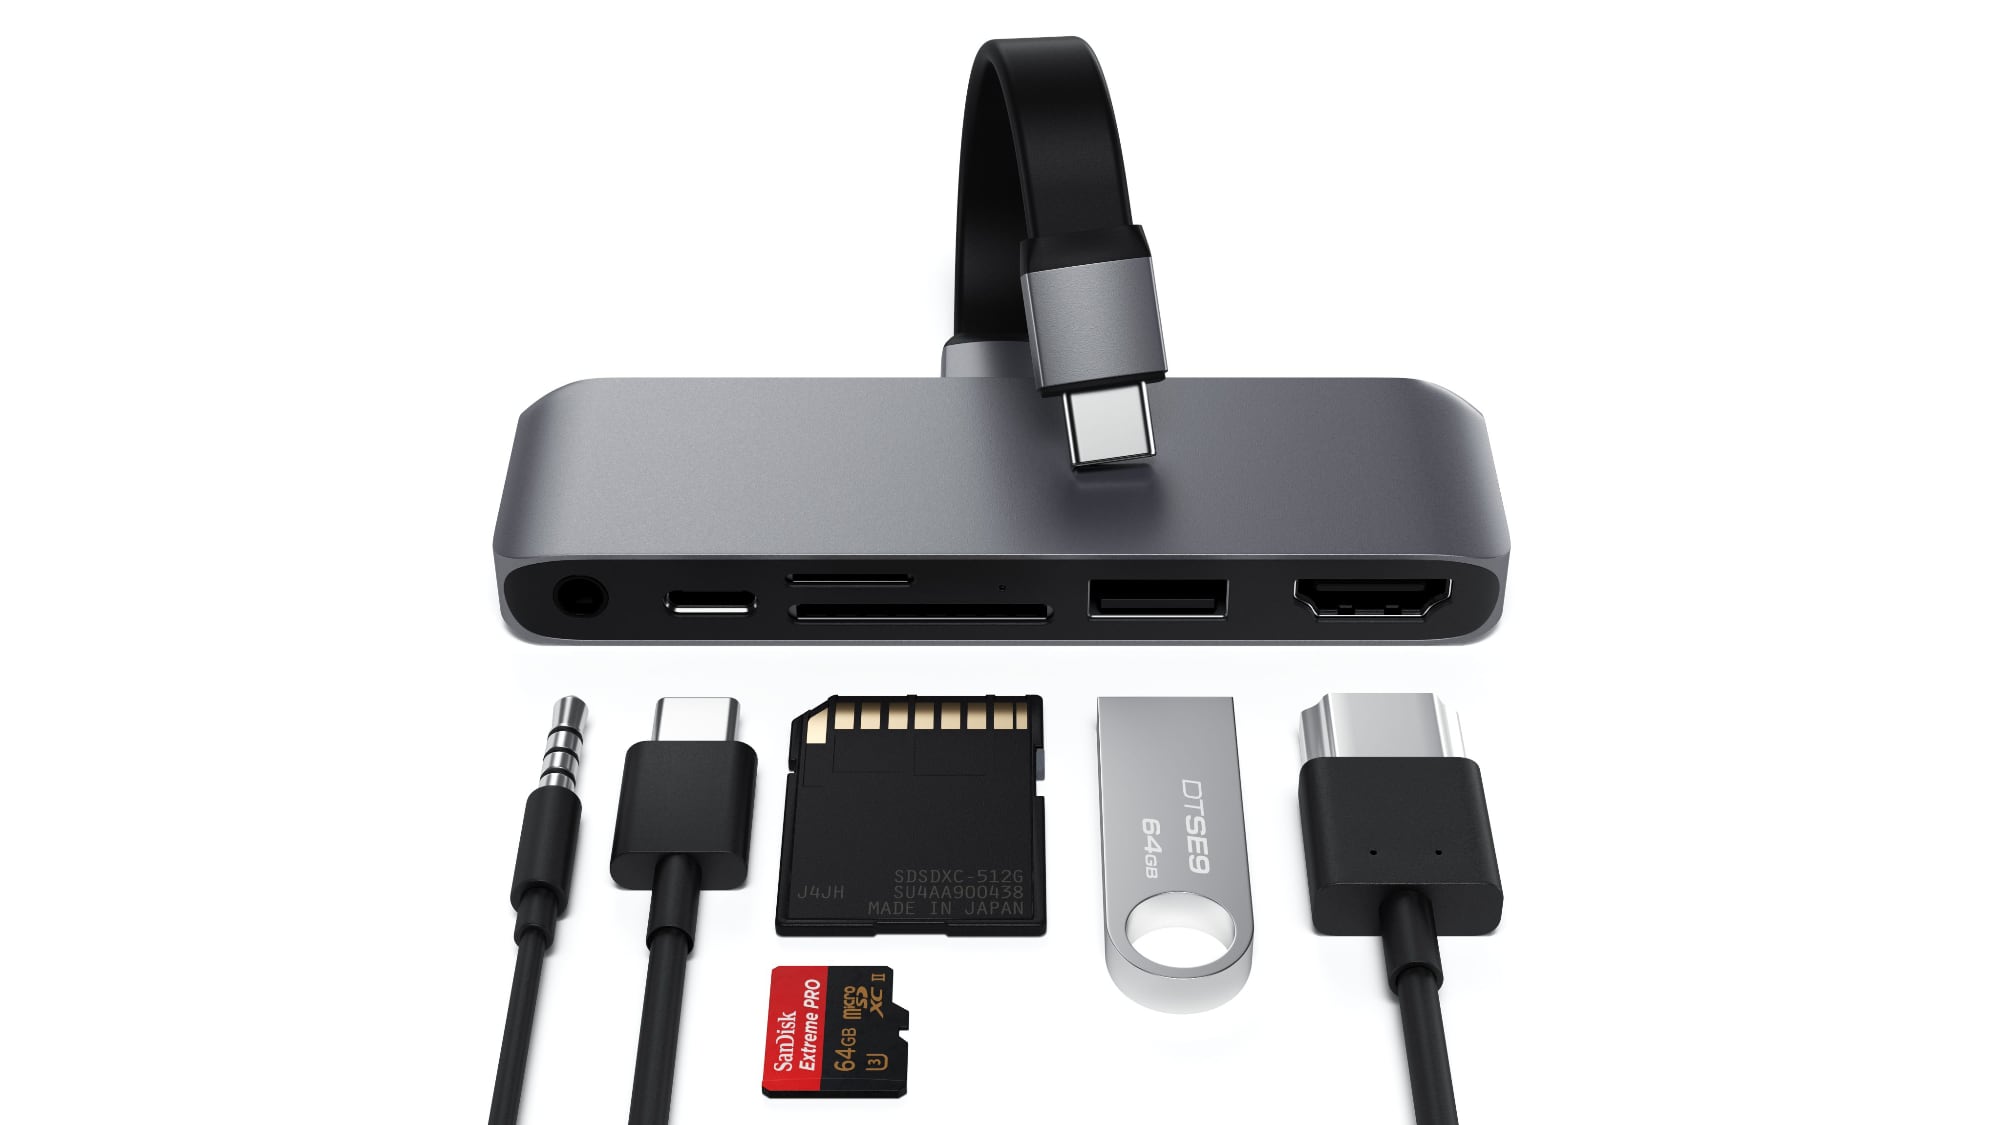 Satechi Launches New USB-C Hub for M1 iPads